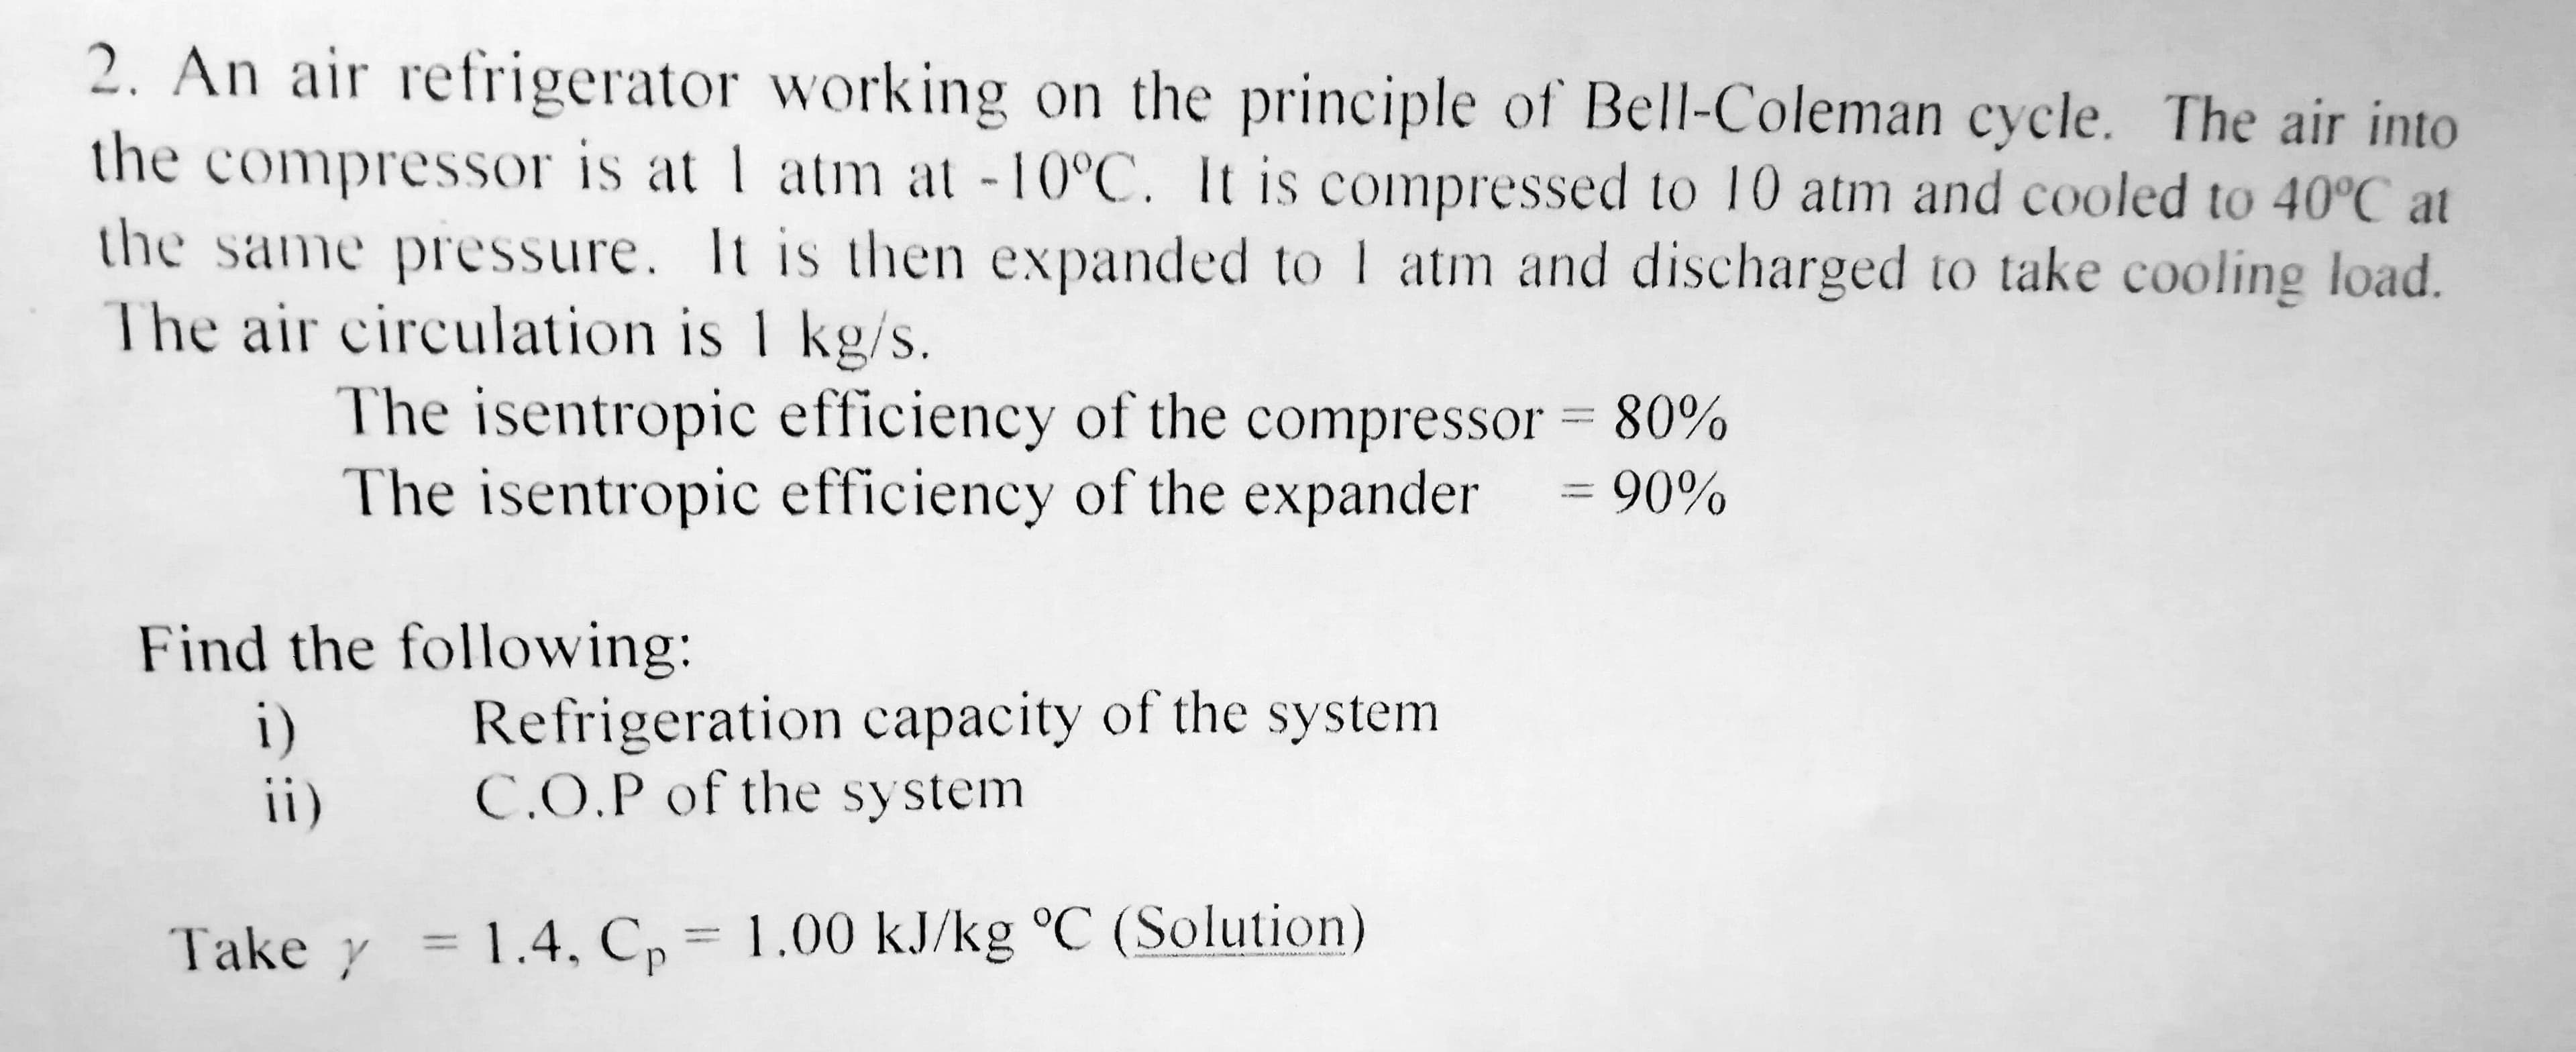 2. An air refrigerator working on the principle of Bell-Coleman cycle. The air into
the
compressor is at 1 atm at -10°C. It is compressed to 10 atm and cooled to 40°C at
the same pressure. It is then expanded to I atm and discharged to take cooling load.
The air circulation is 1 kg/s.
The isentropic efficiency of the compressor = 80%
The isentropic efficiency of the expander
= 90%
Find the following:
i)
ii)
Refrigeration capacity of the system
C.O.P of the system
